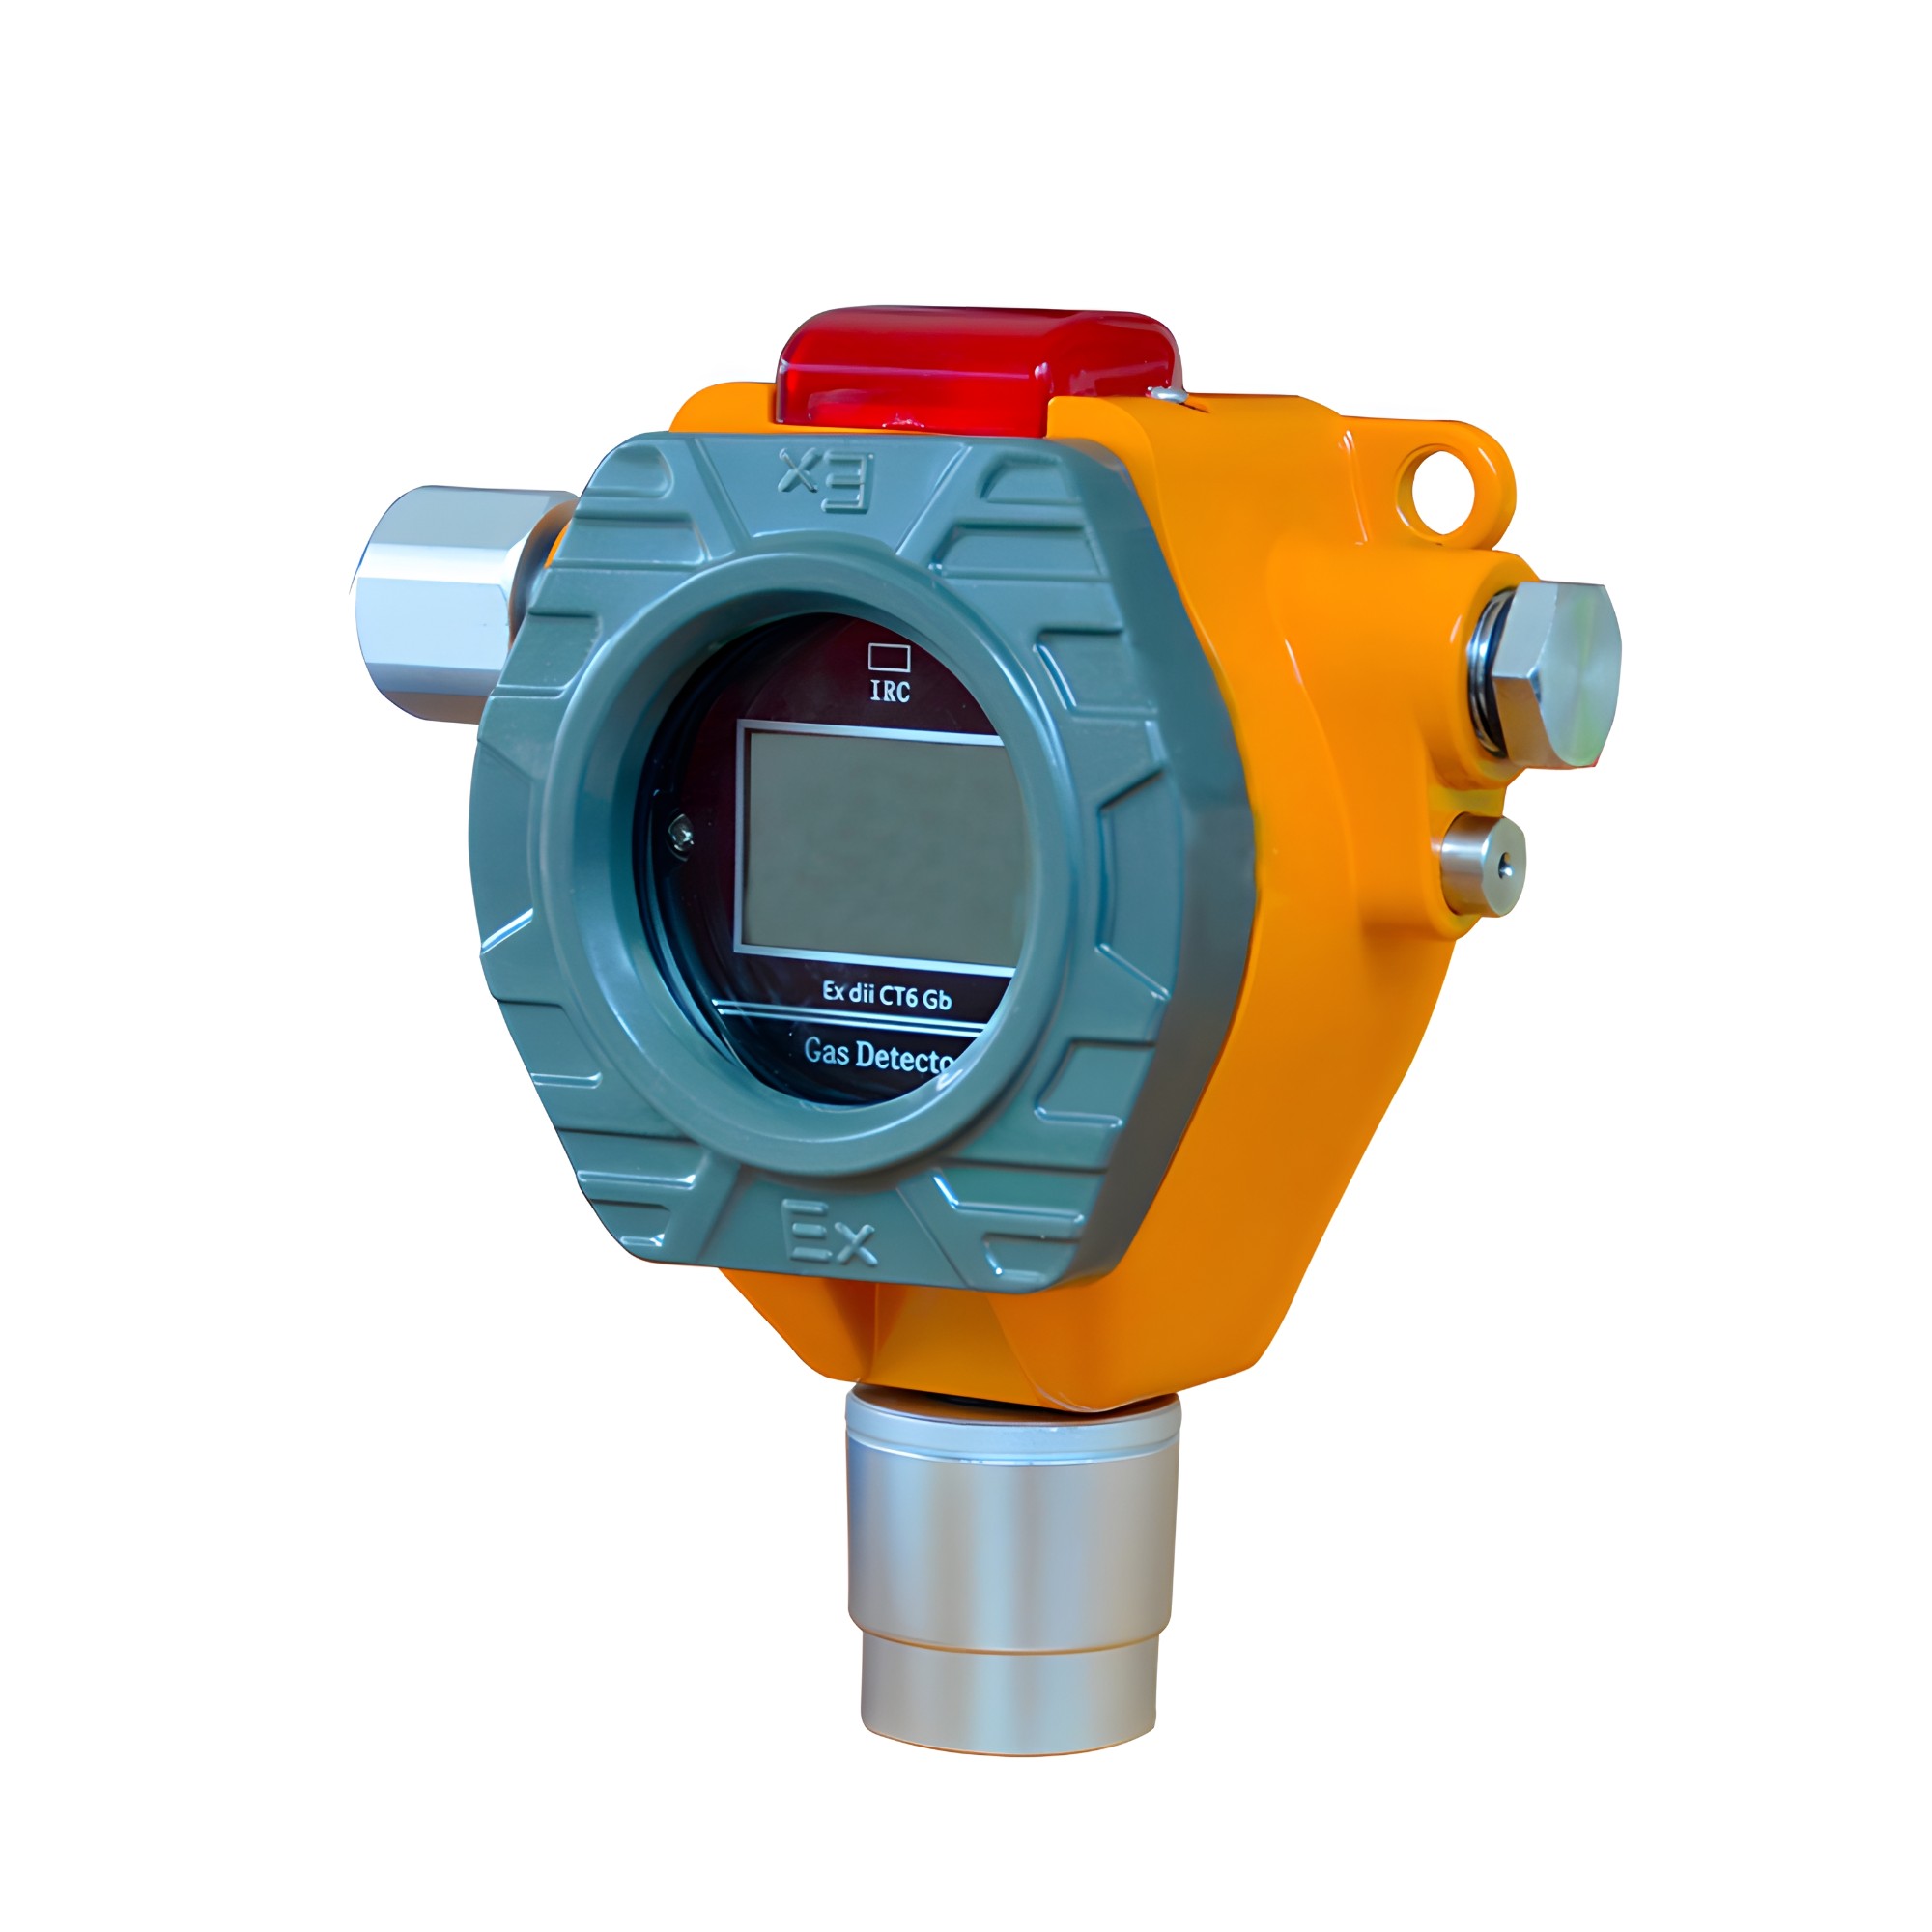 Zhongan S105 gas detector adopts the mixed technology of two-wire signal and power supply, wiring only needs 2 wires, no positive and negative wiring is convenient, the detector integrates sound and l